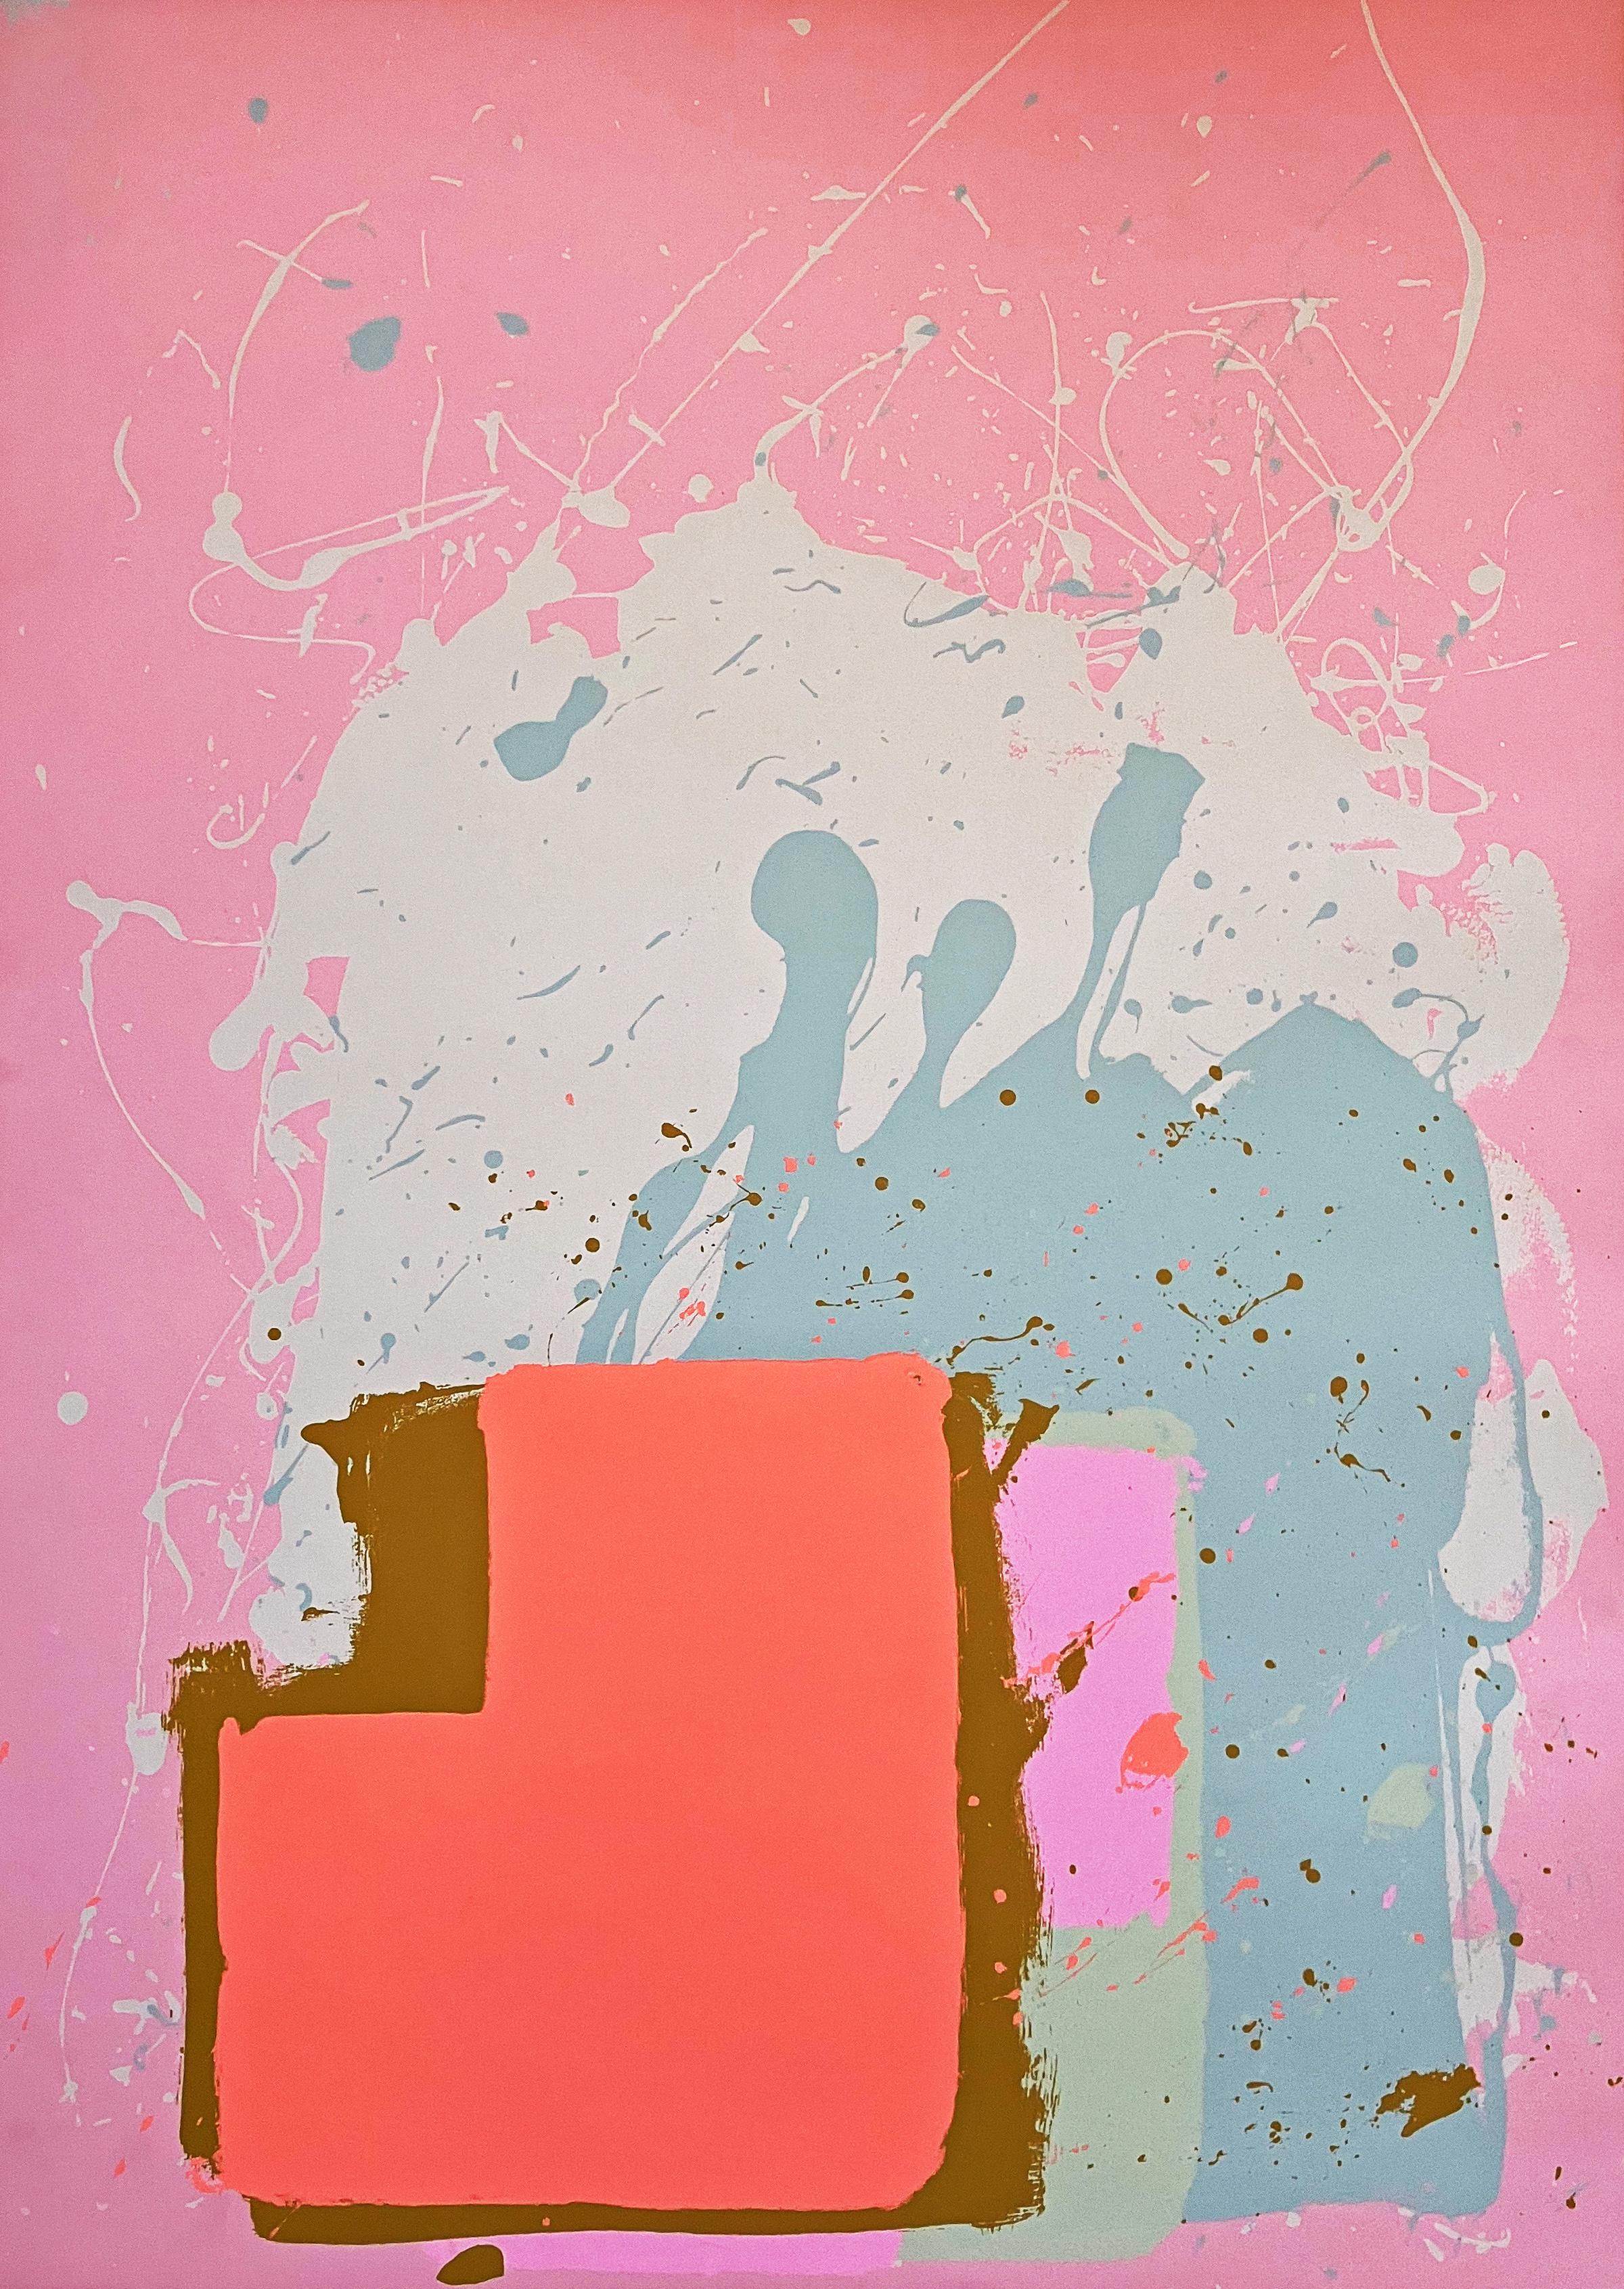 Red Block on Pink - from the New York Suite - Print by John Hoyland